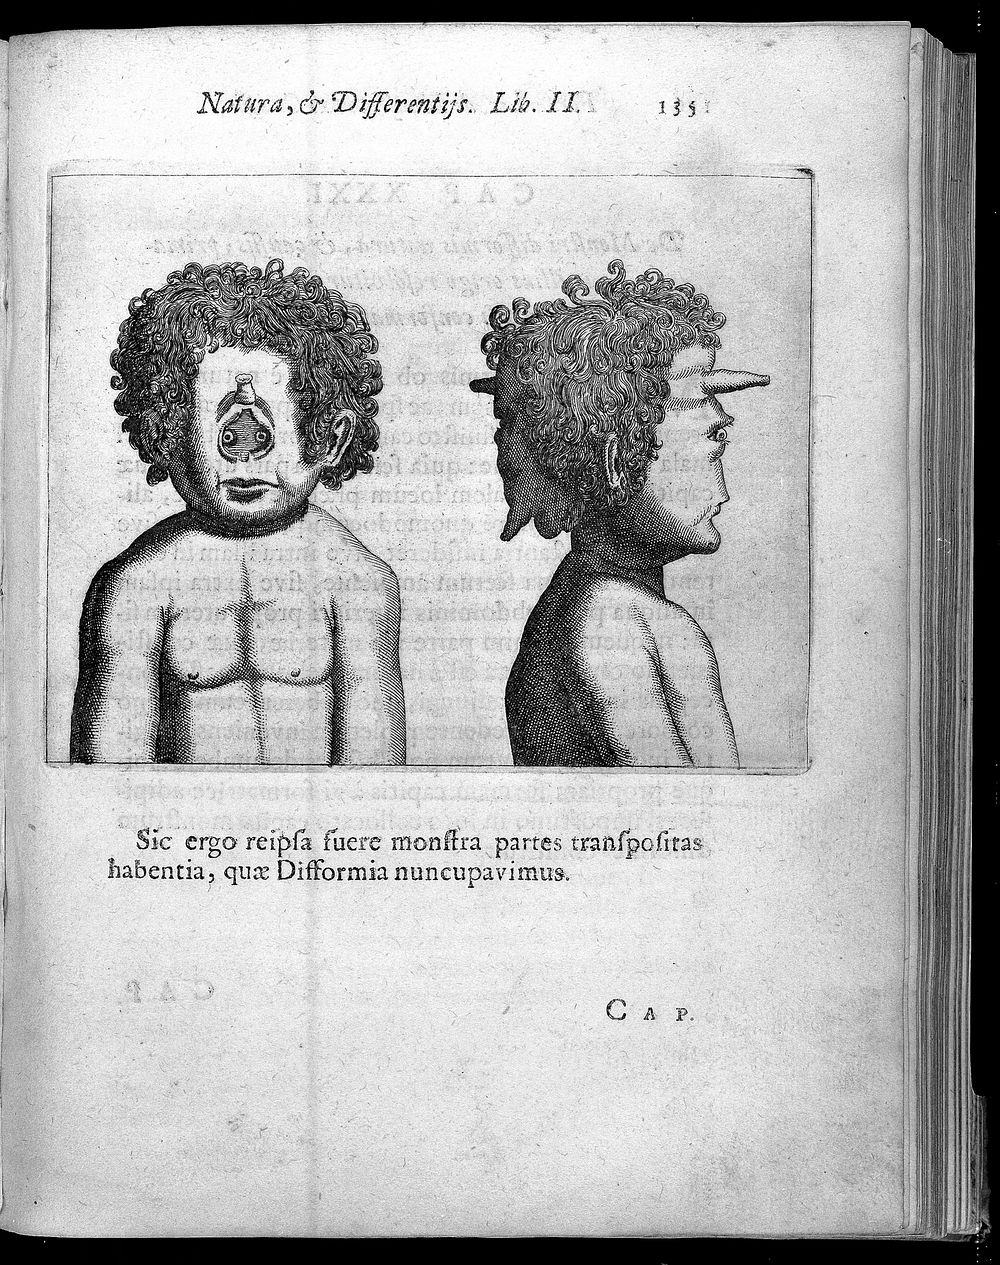 Two human heads with abnormality, one frontal view with no nose and one profile with large nose